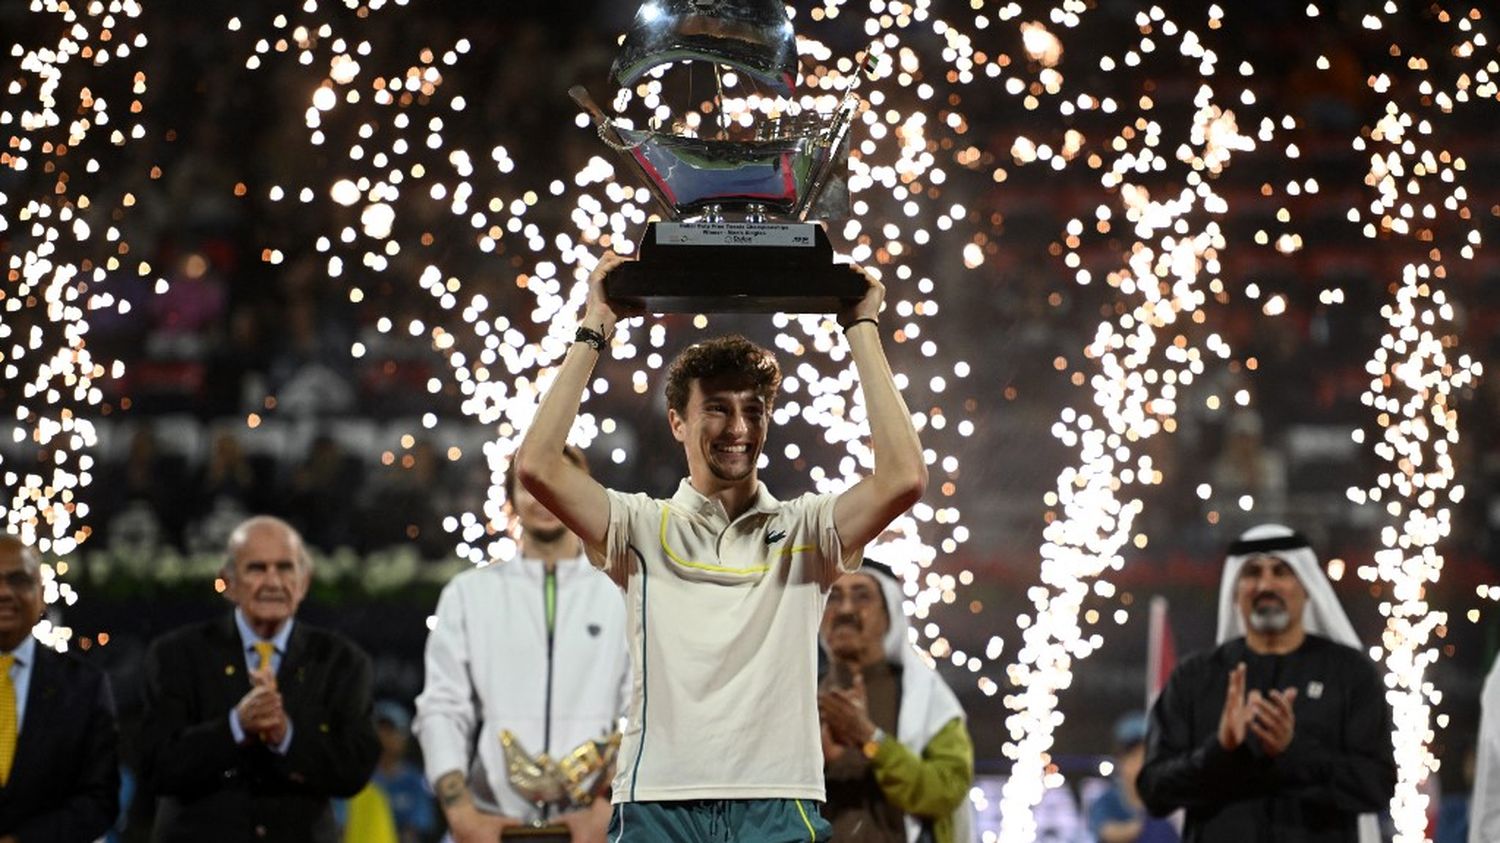 Tennis: Ugo Humbert wins the tournament in Dubai and will be 14th in the world on Monday